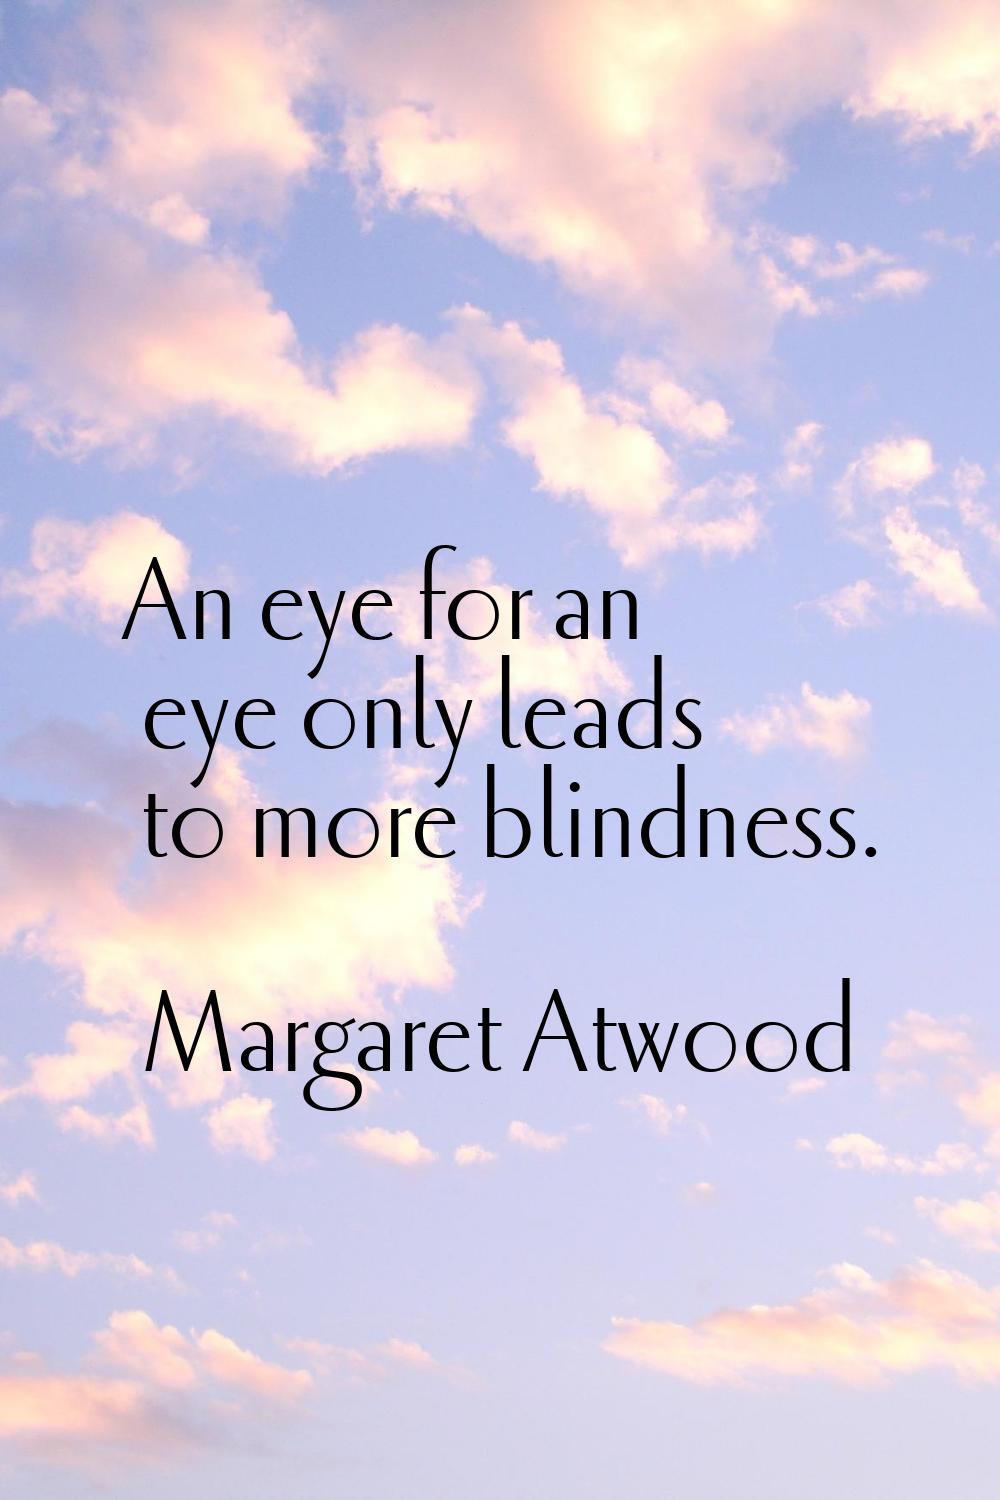 An eye for an eye only leads to more blindness.